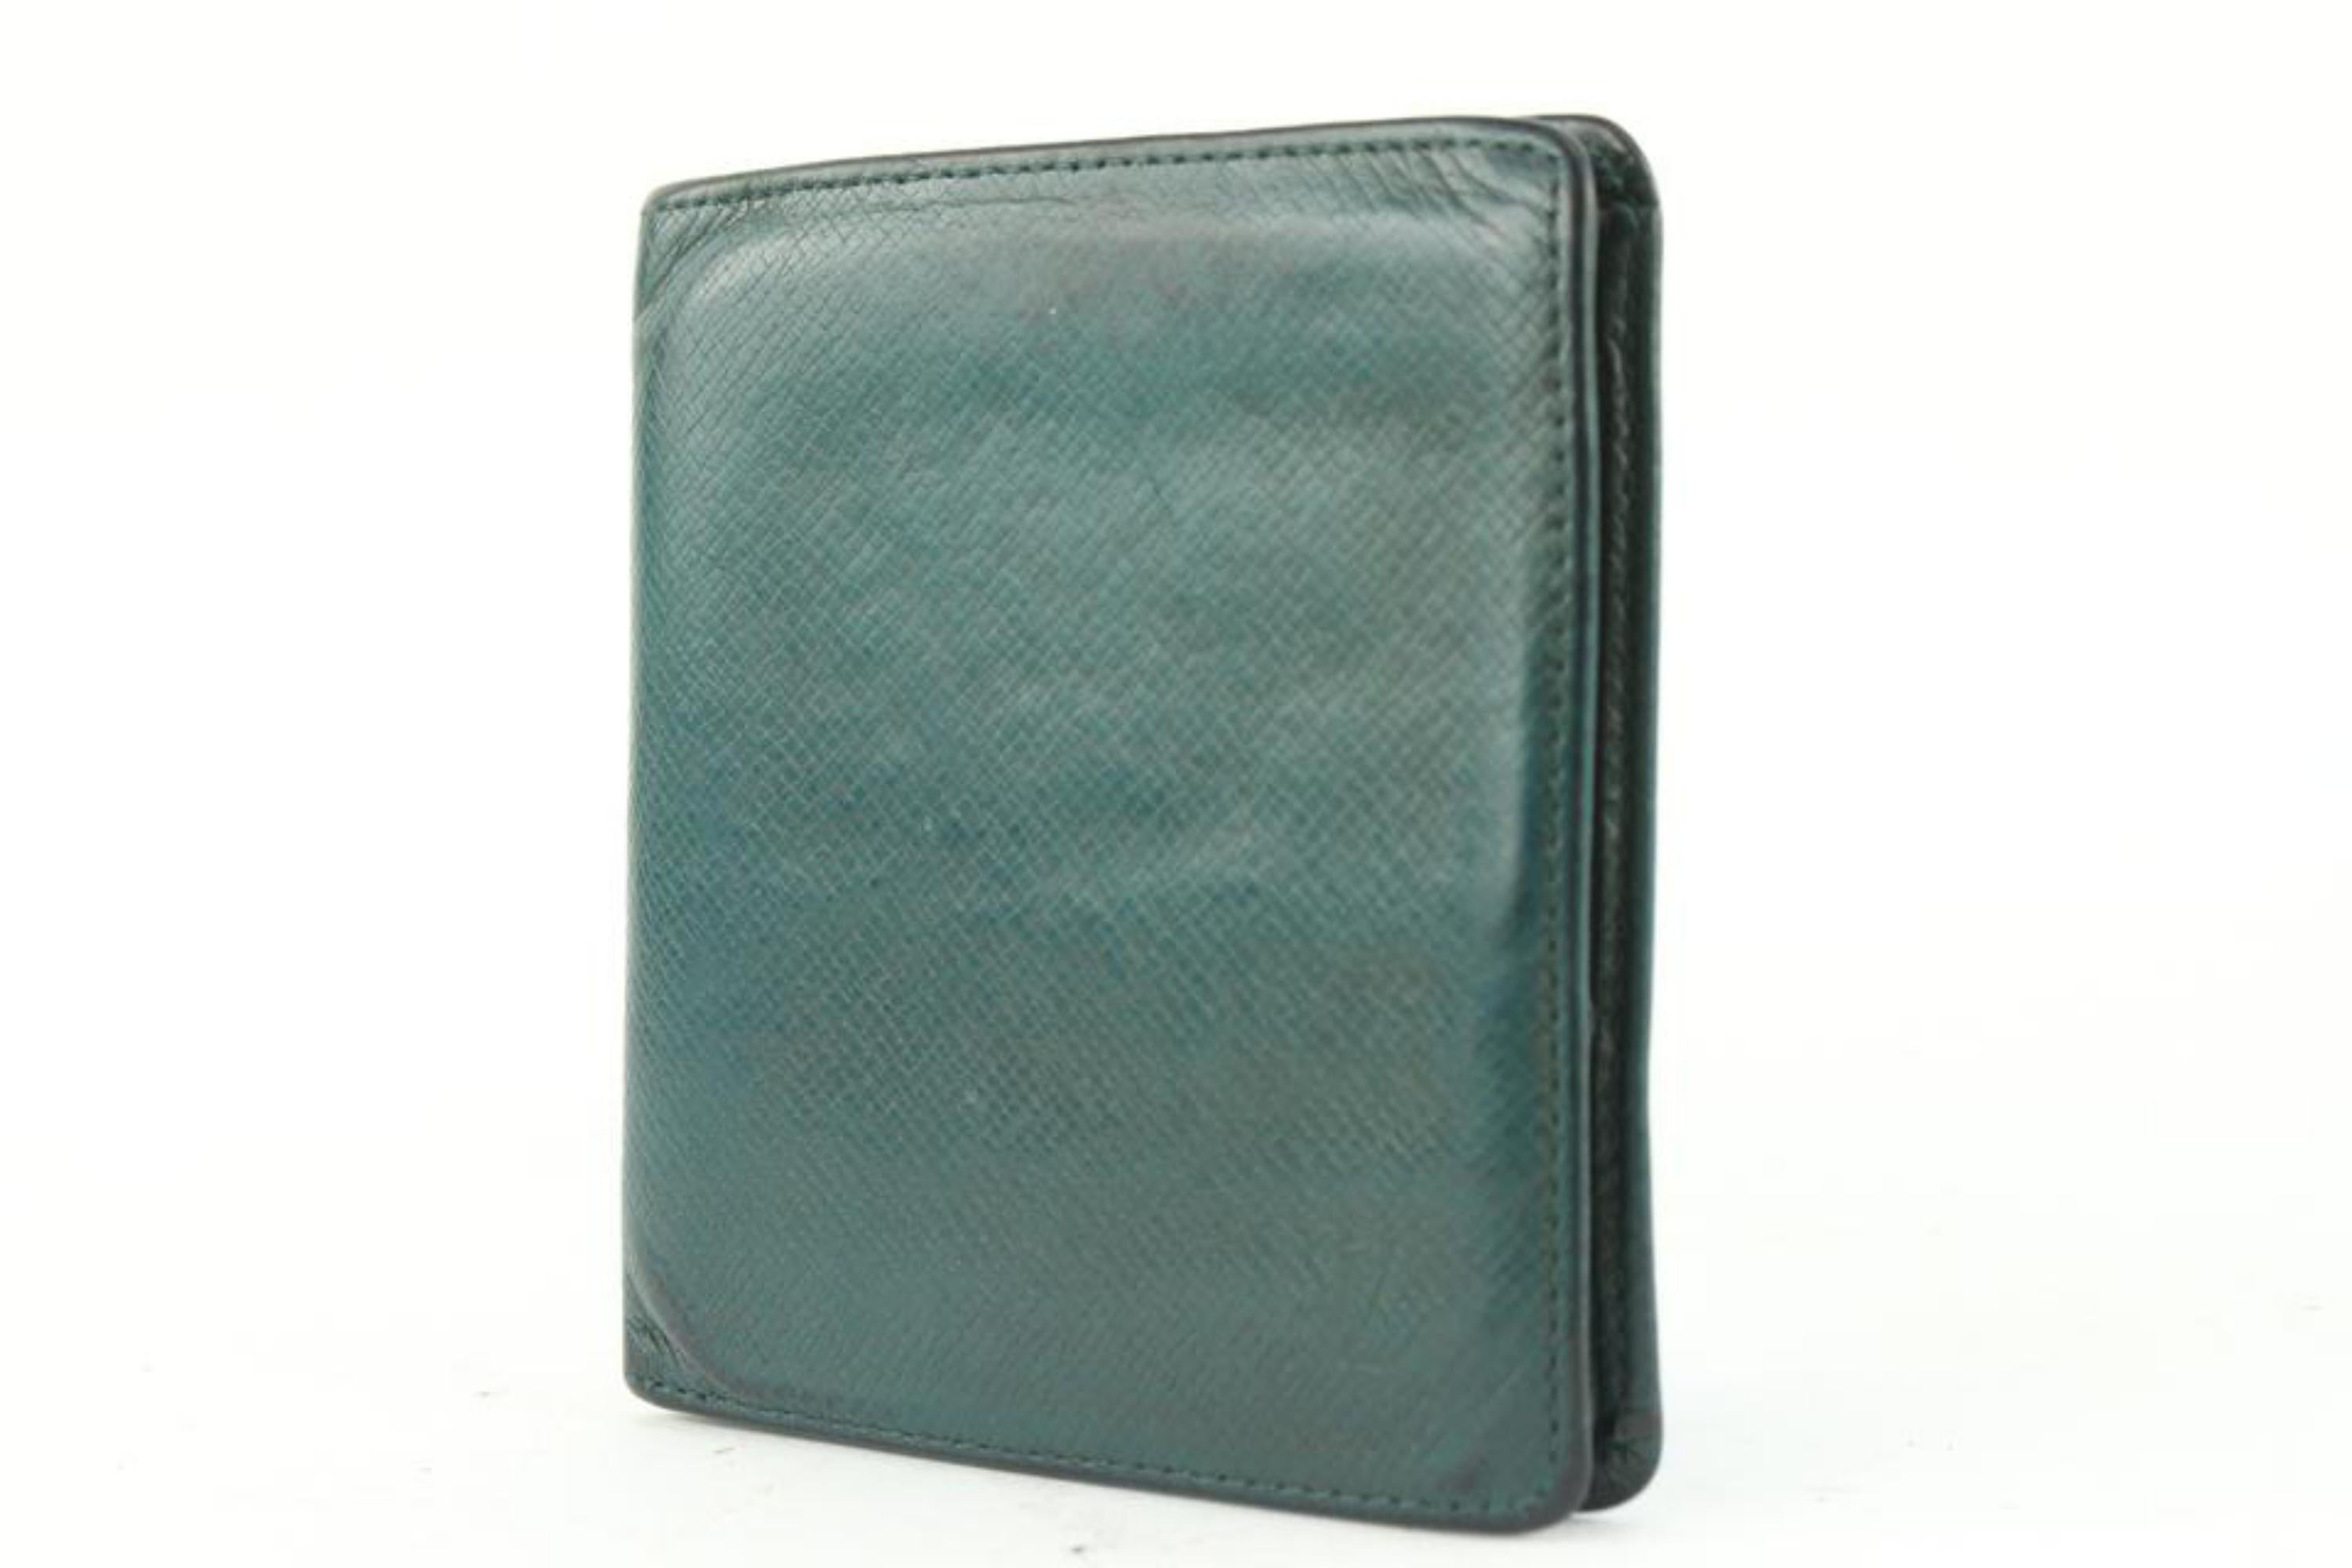 Louis Vuitton Green Taiga Leather Bifold Men's Wallet Marco Florin Slender 5LV111
Date Code/Serial Number: MI 870
Made In: France
Measurements: Length: 4 